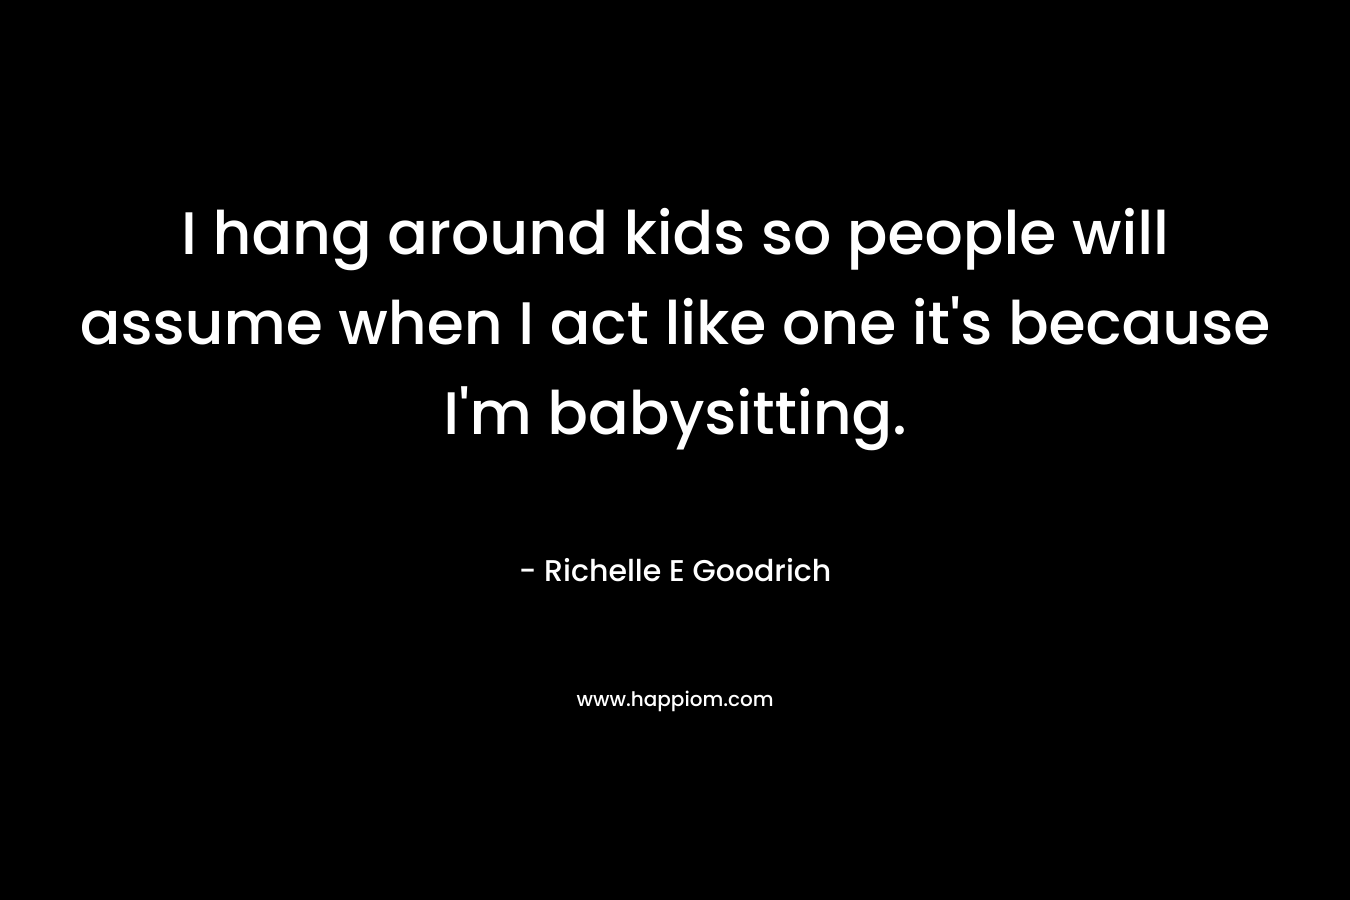 I hang around kids so people will assume when I act like one it’s because I’m babysitting. – Richelle E Goodrich